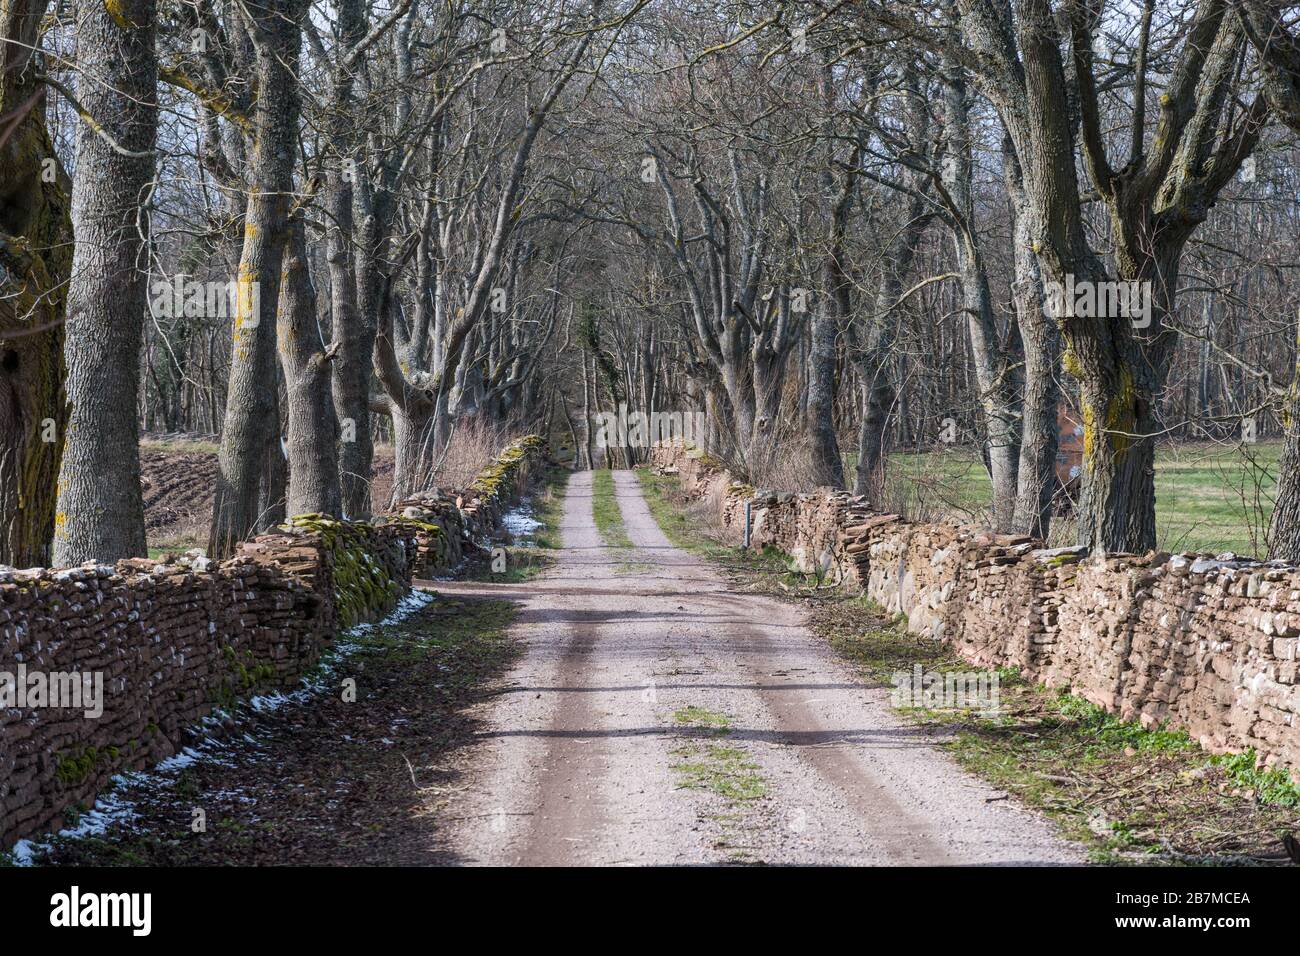 Country road in an alley surrounded by dry stone walls in spring season Stock Photo